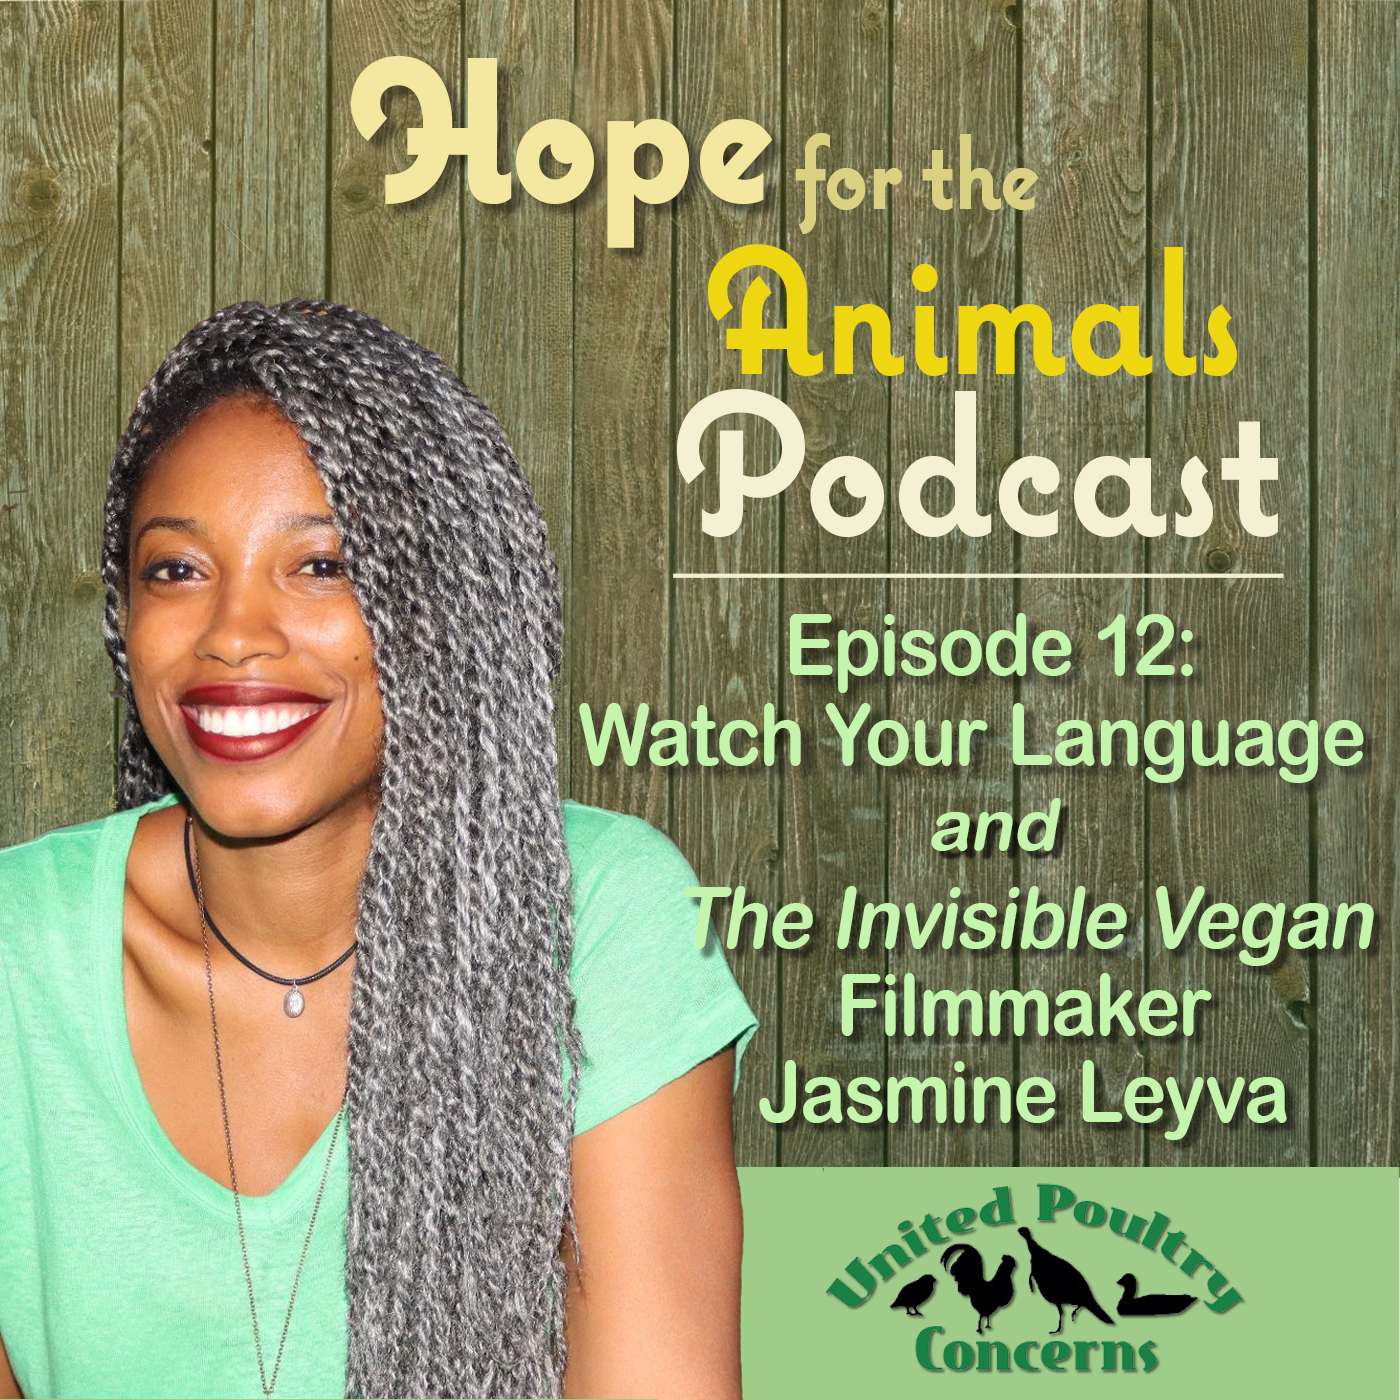 Episode 12: Watch Your Language and The Invisible Vegan Filmmaker Jasmine Leyva